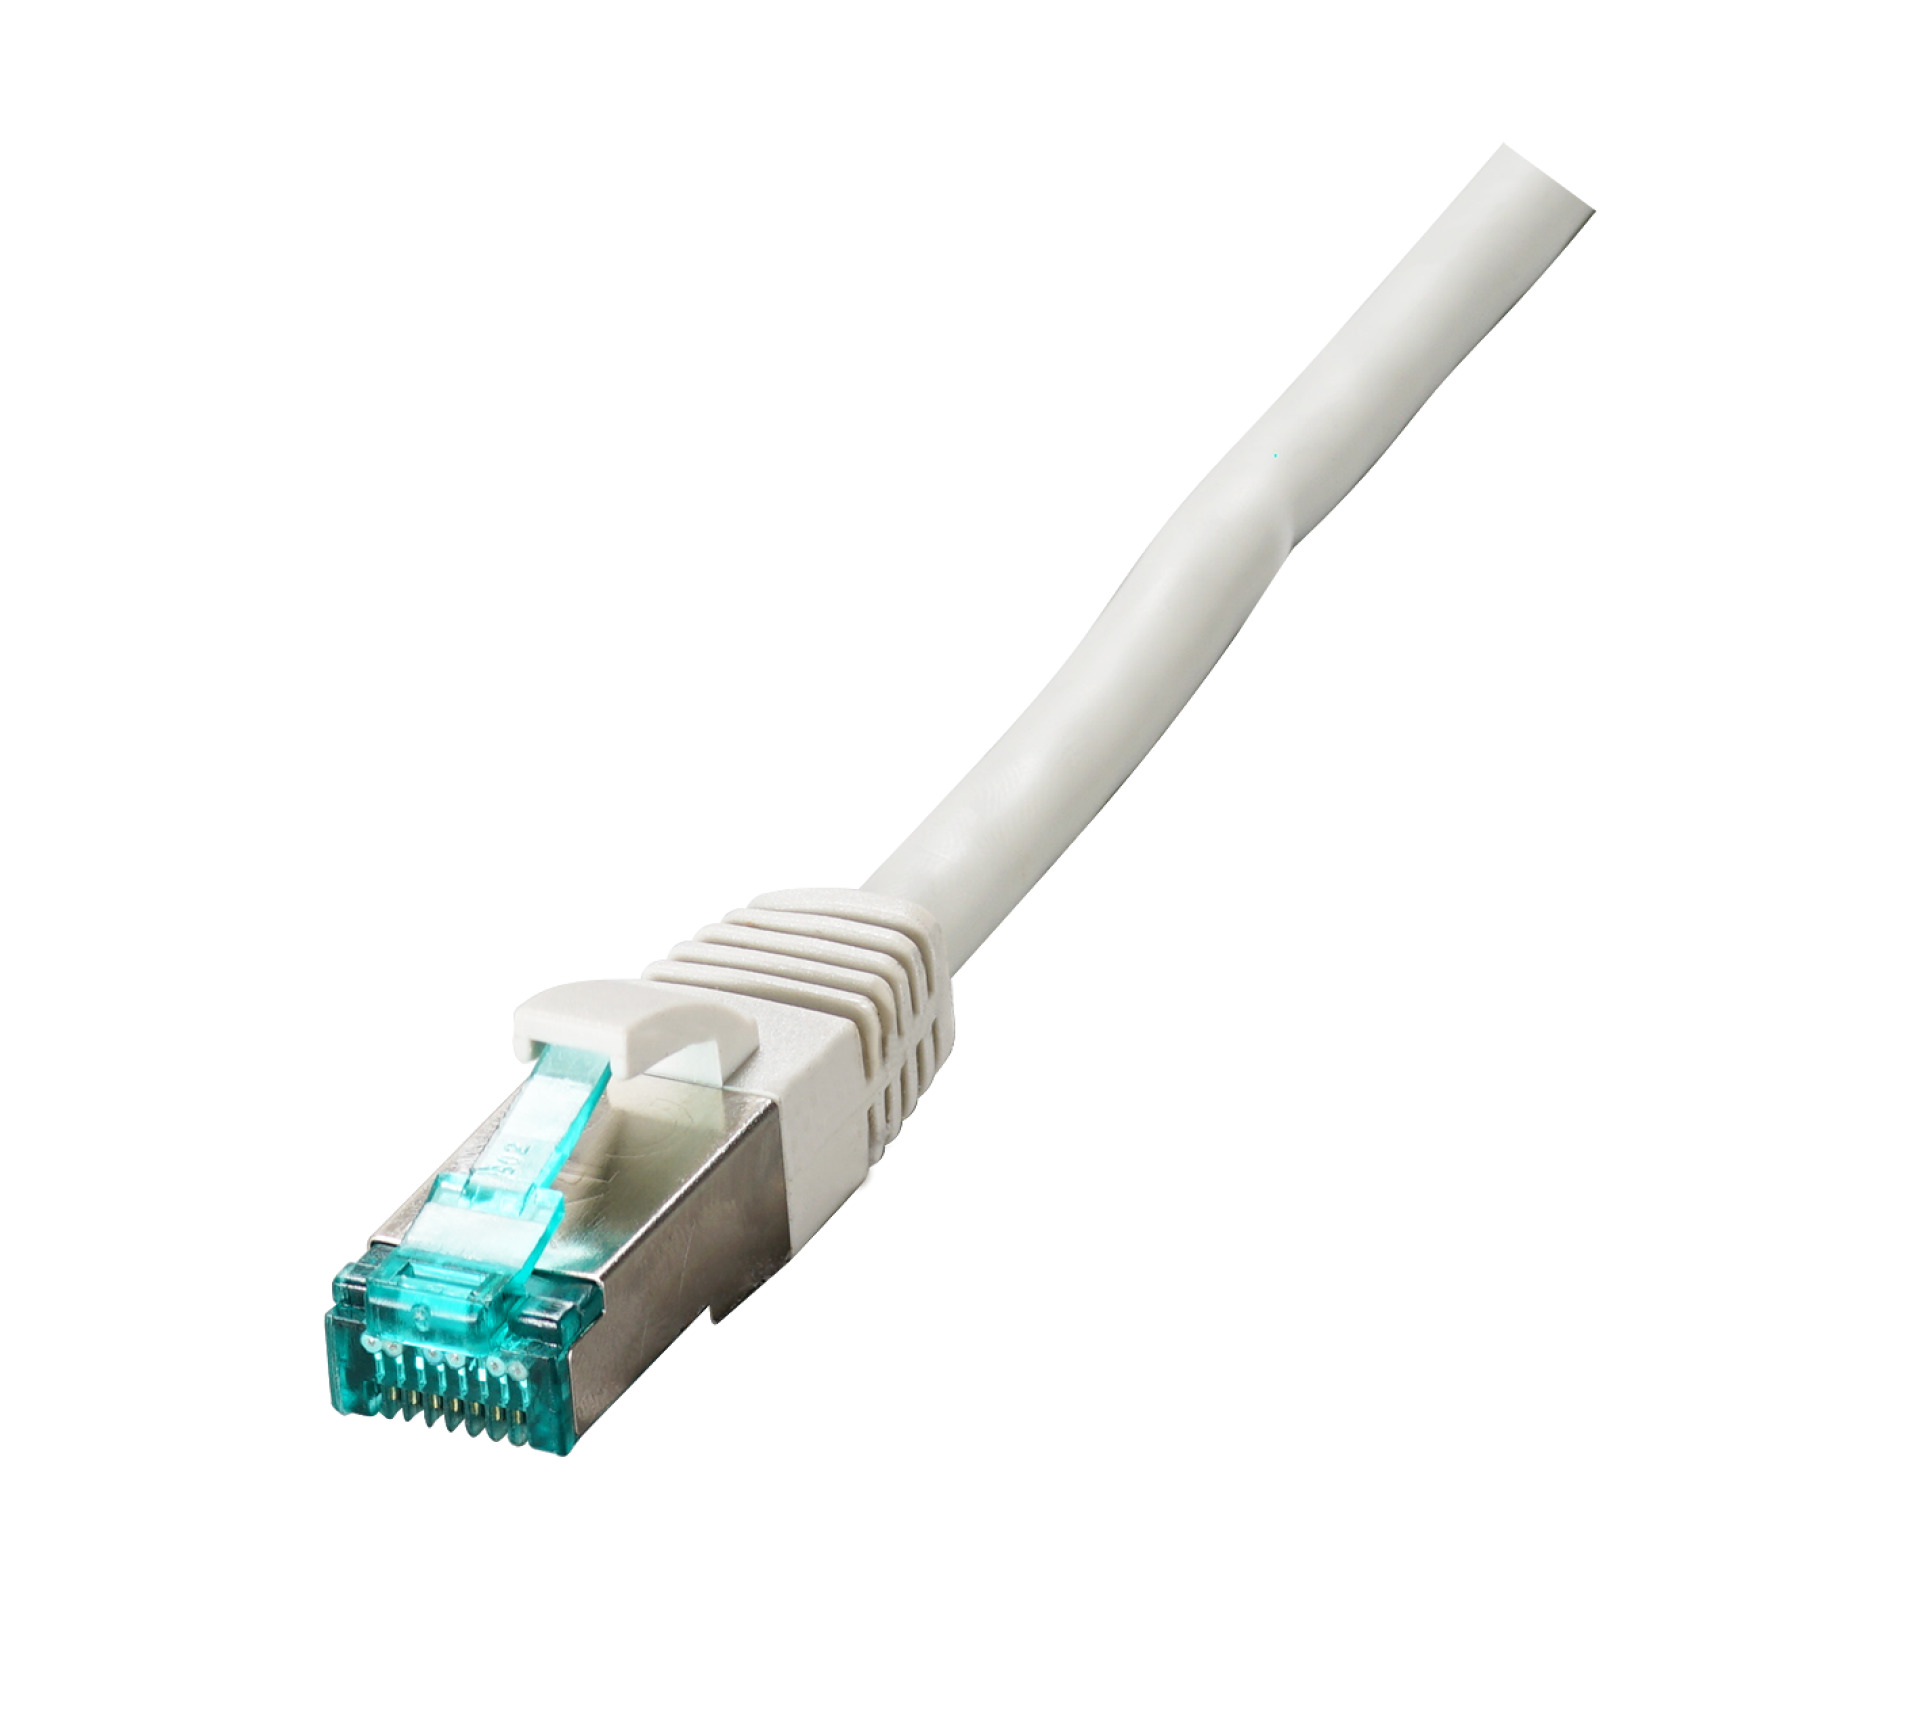 RJ45 Patch cable S/FTP, Cat.6A, LSZH, one side 90° angled, 2m, grey